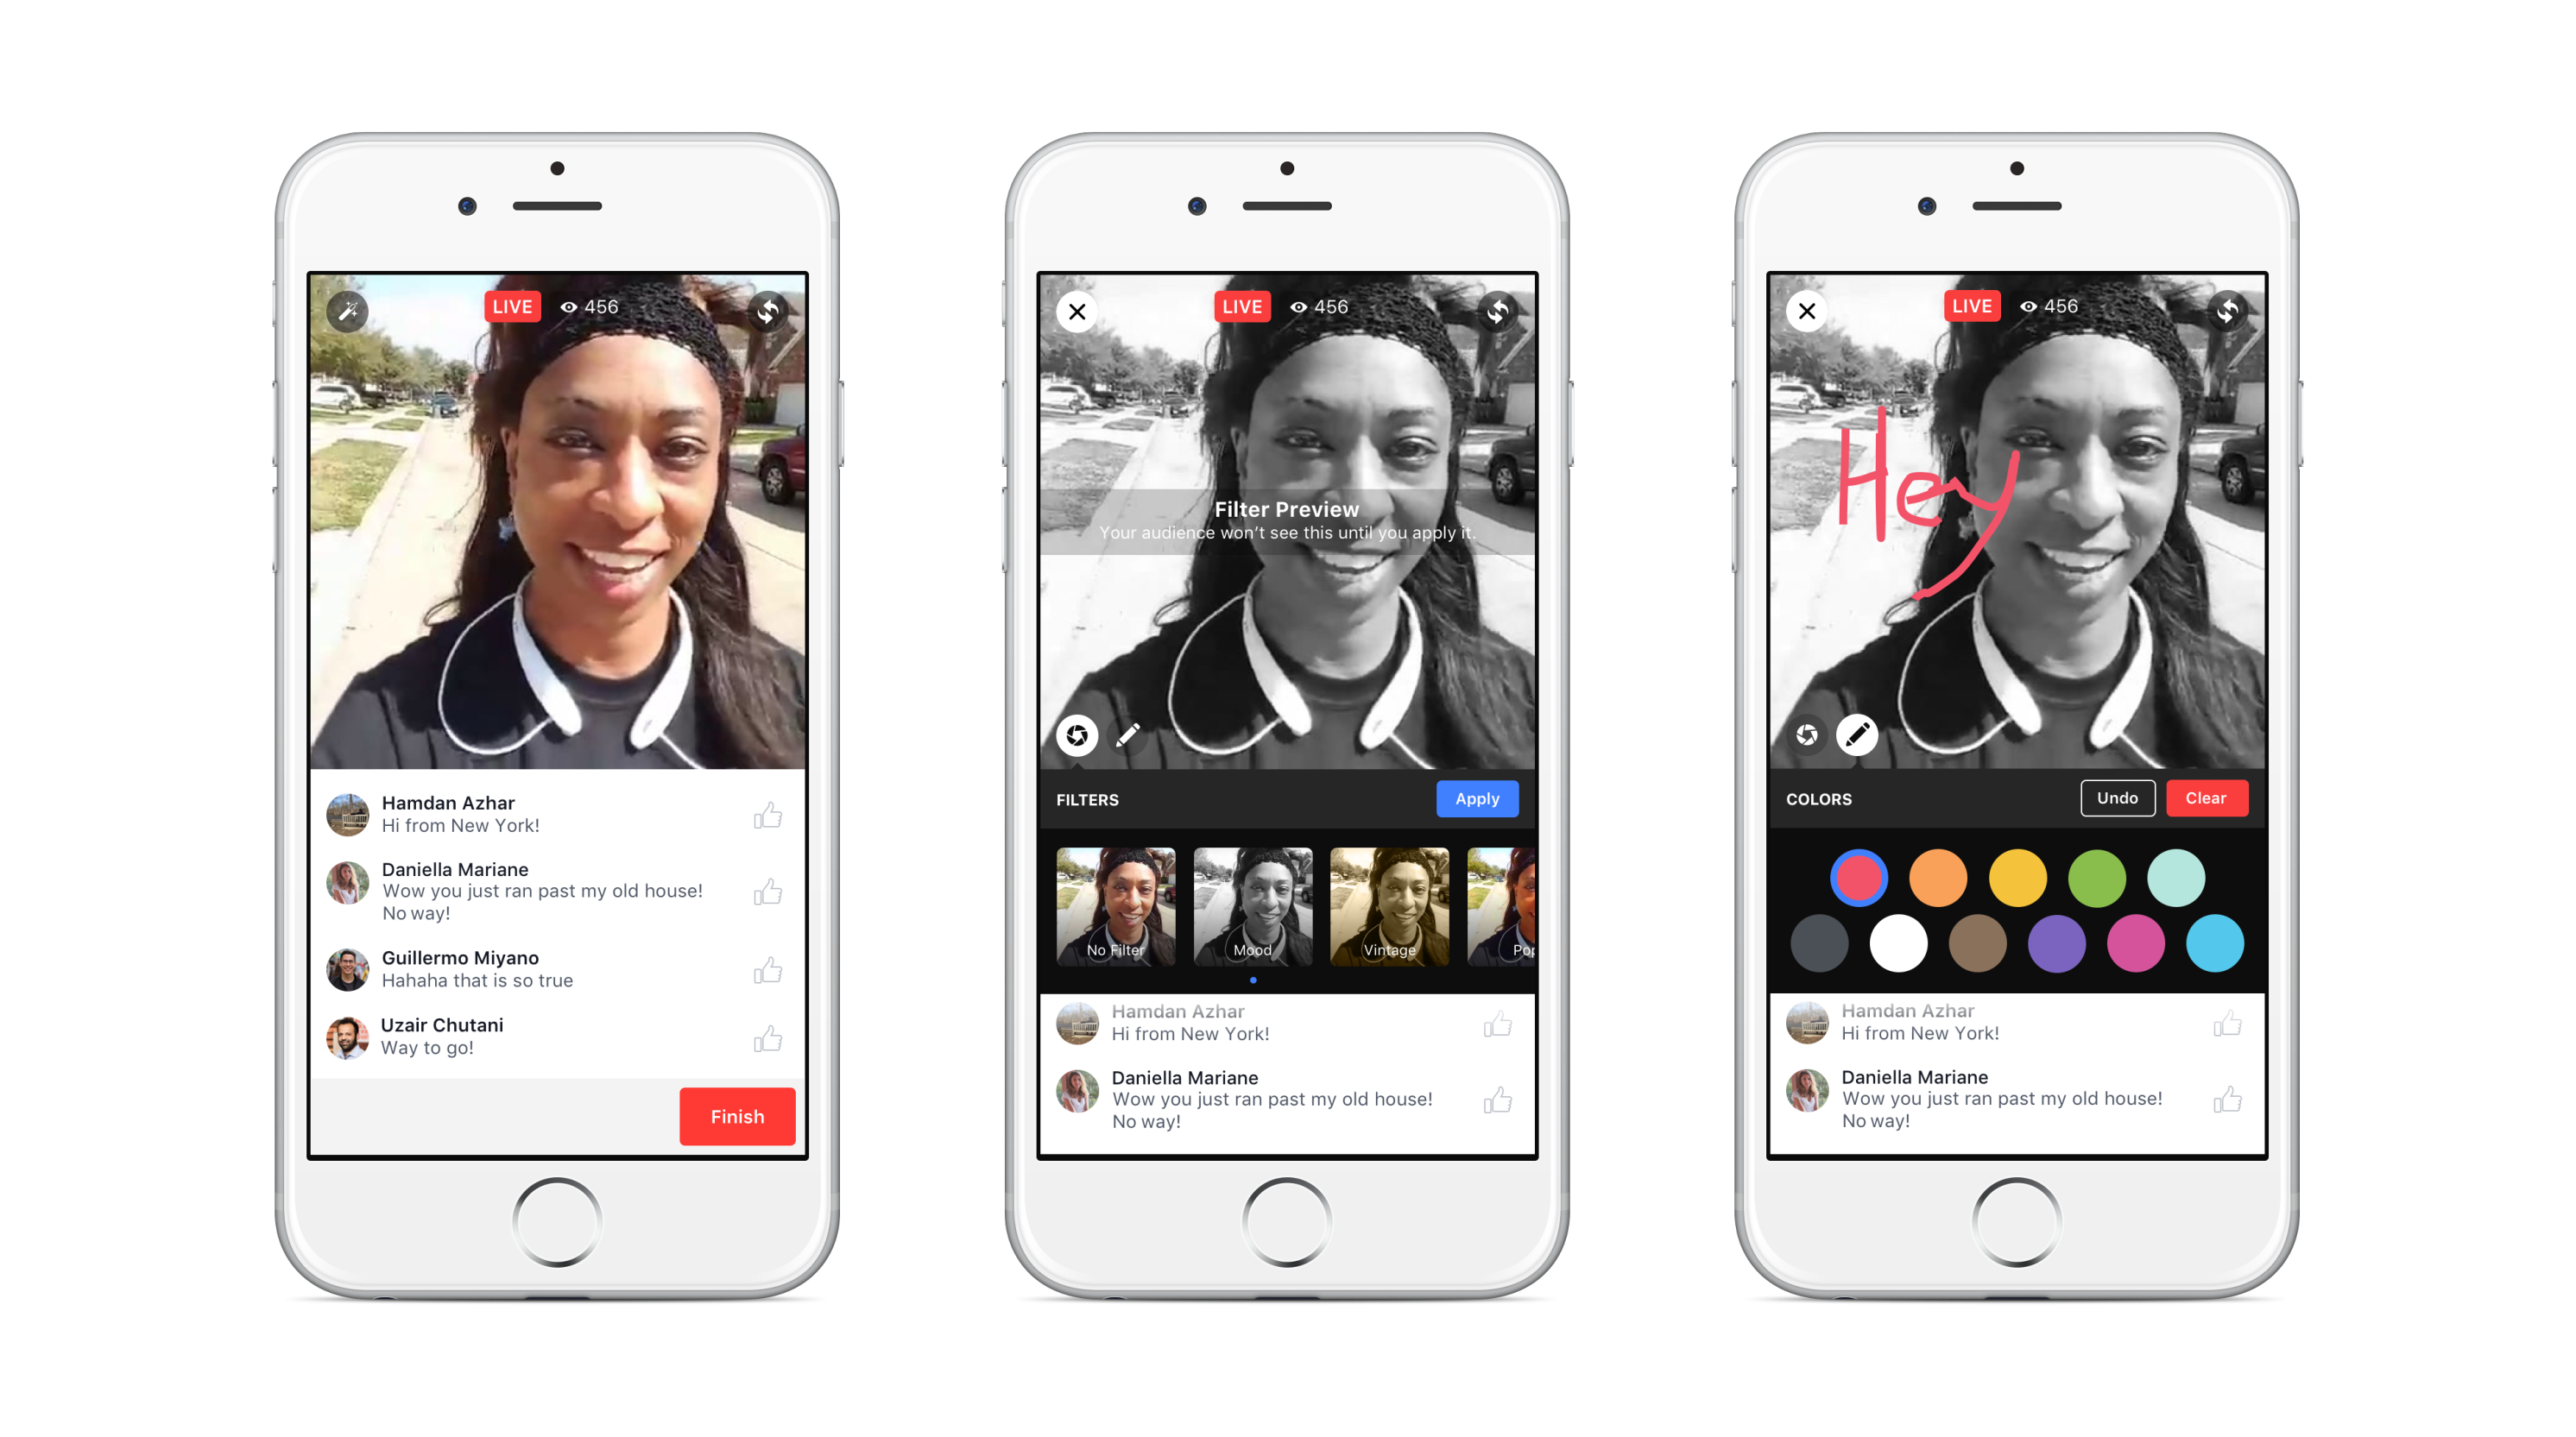 Facebook Live Video for Church Events